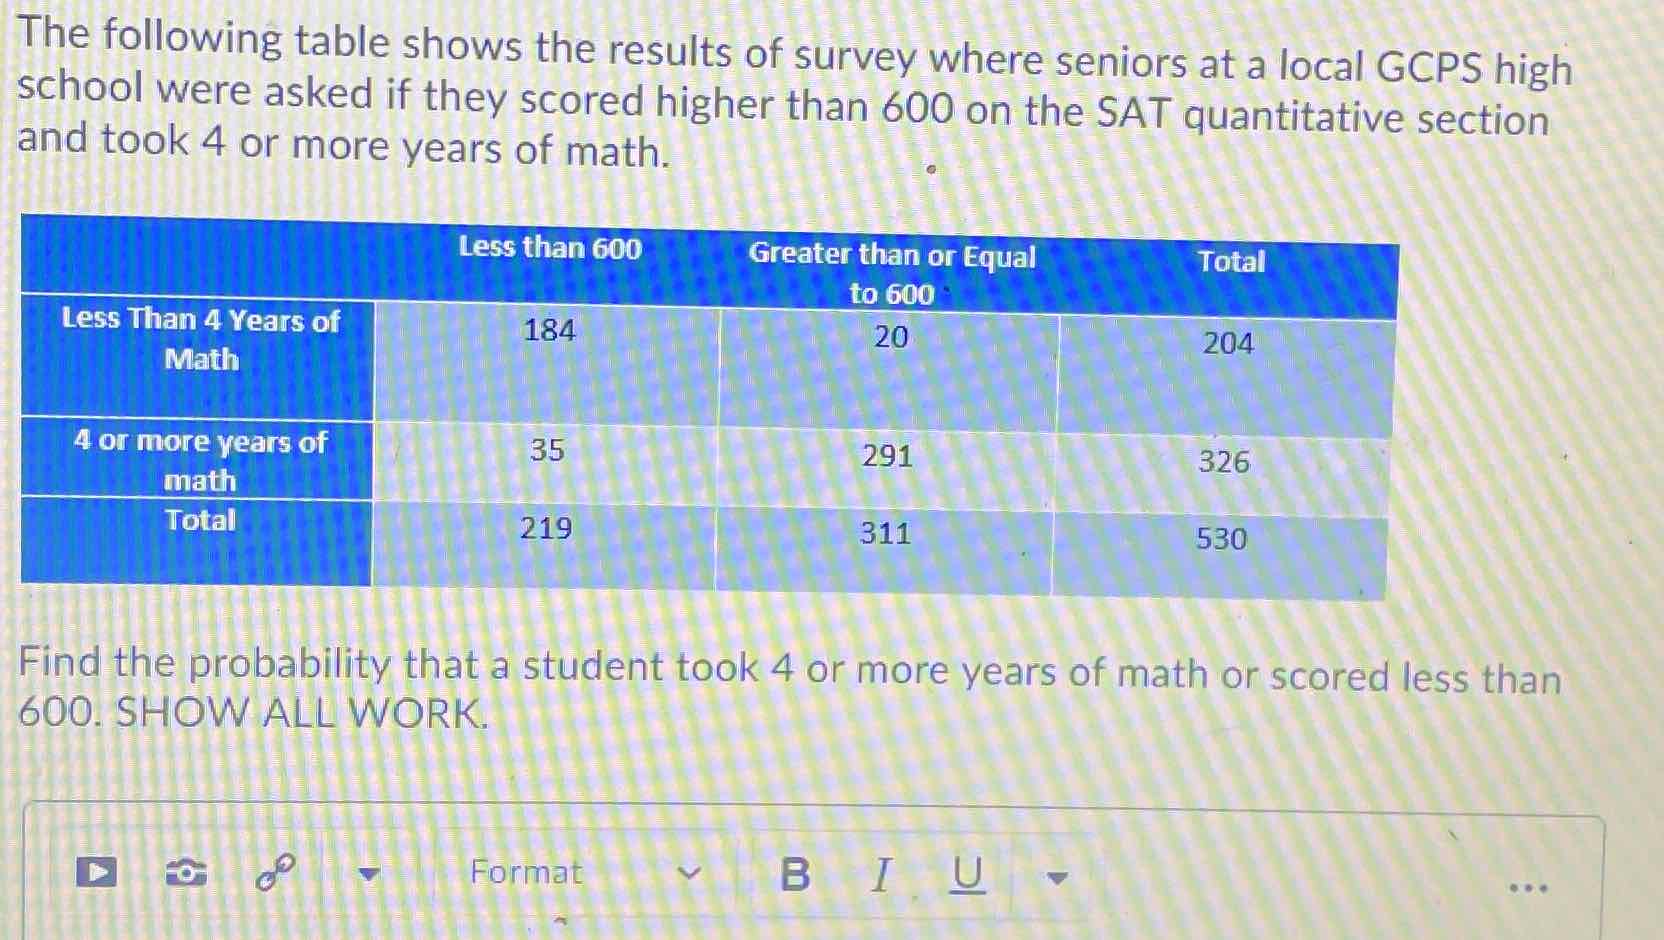 The following table shows the results of survey where seniors at a local GCPS high school were asked if they scored higher than 600 on the SAT quantitative section and took 4 or more years of math.
\begin{tabular}{|c|c|c|c|}
\hline & Less than 600 & Greater than or Equal to 600 & Total \\
\hline Less Than 4 Years of Math & 184 & 20 & 204 \\
\hline 4 or more years of math & 35 & 291 & 326 \\
\hline Total & 219 & 311 & 530 \\
\hline
\end{tabular}
Find the probability that a student took 4 or more years of math or scored less than 600. SHOW ALL WORK.